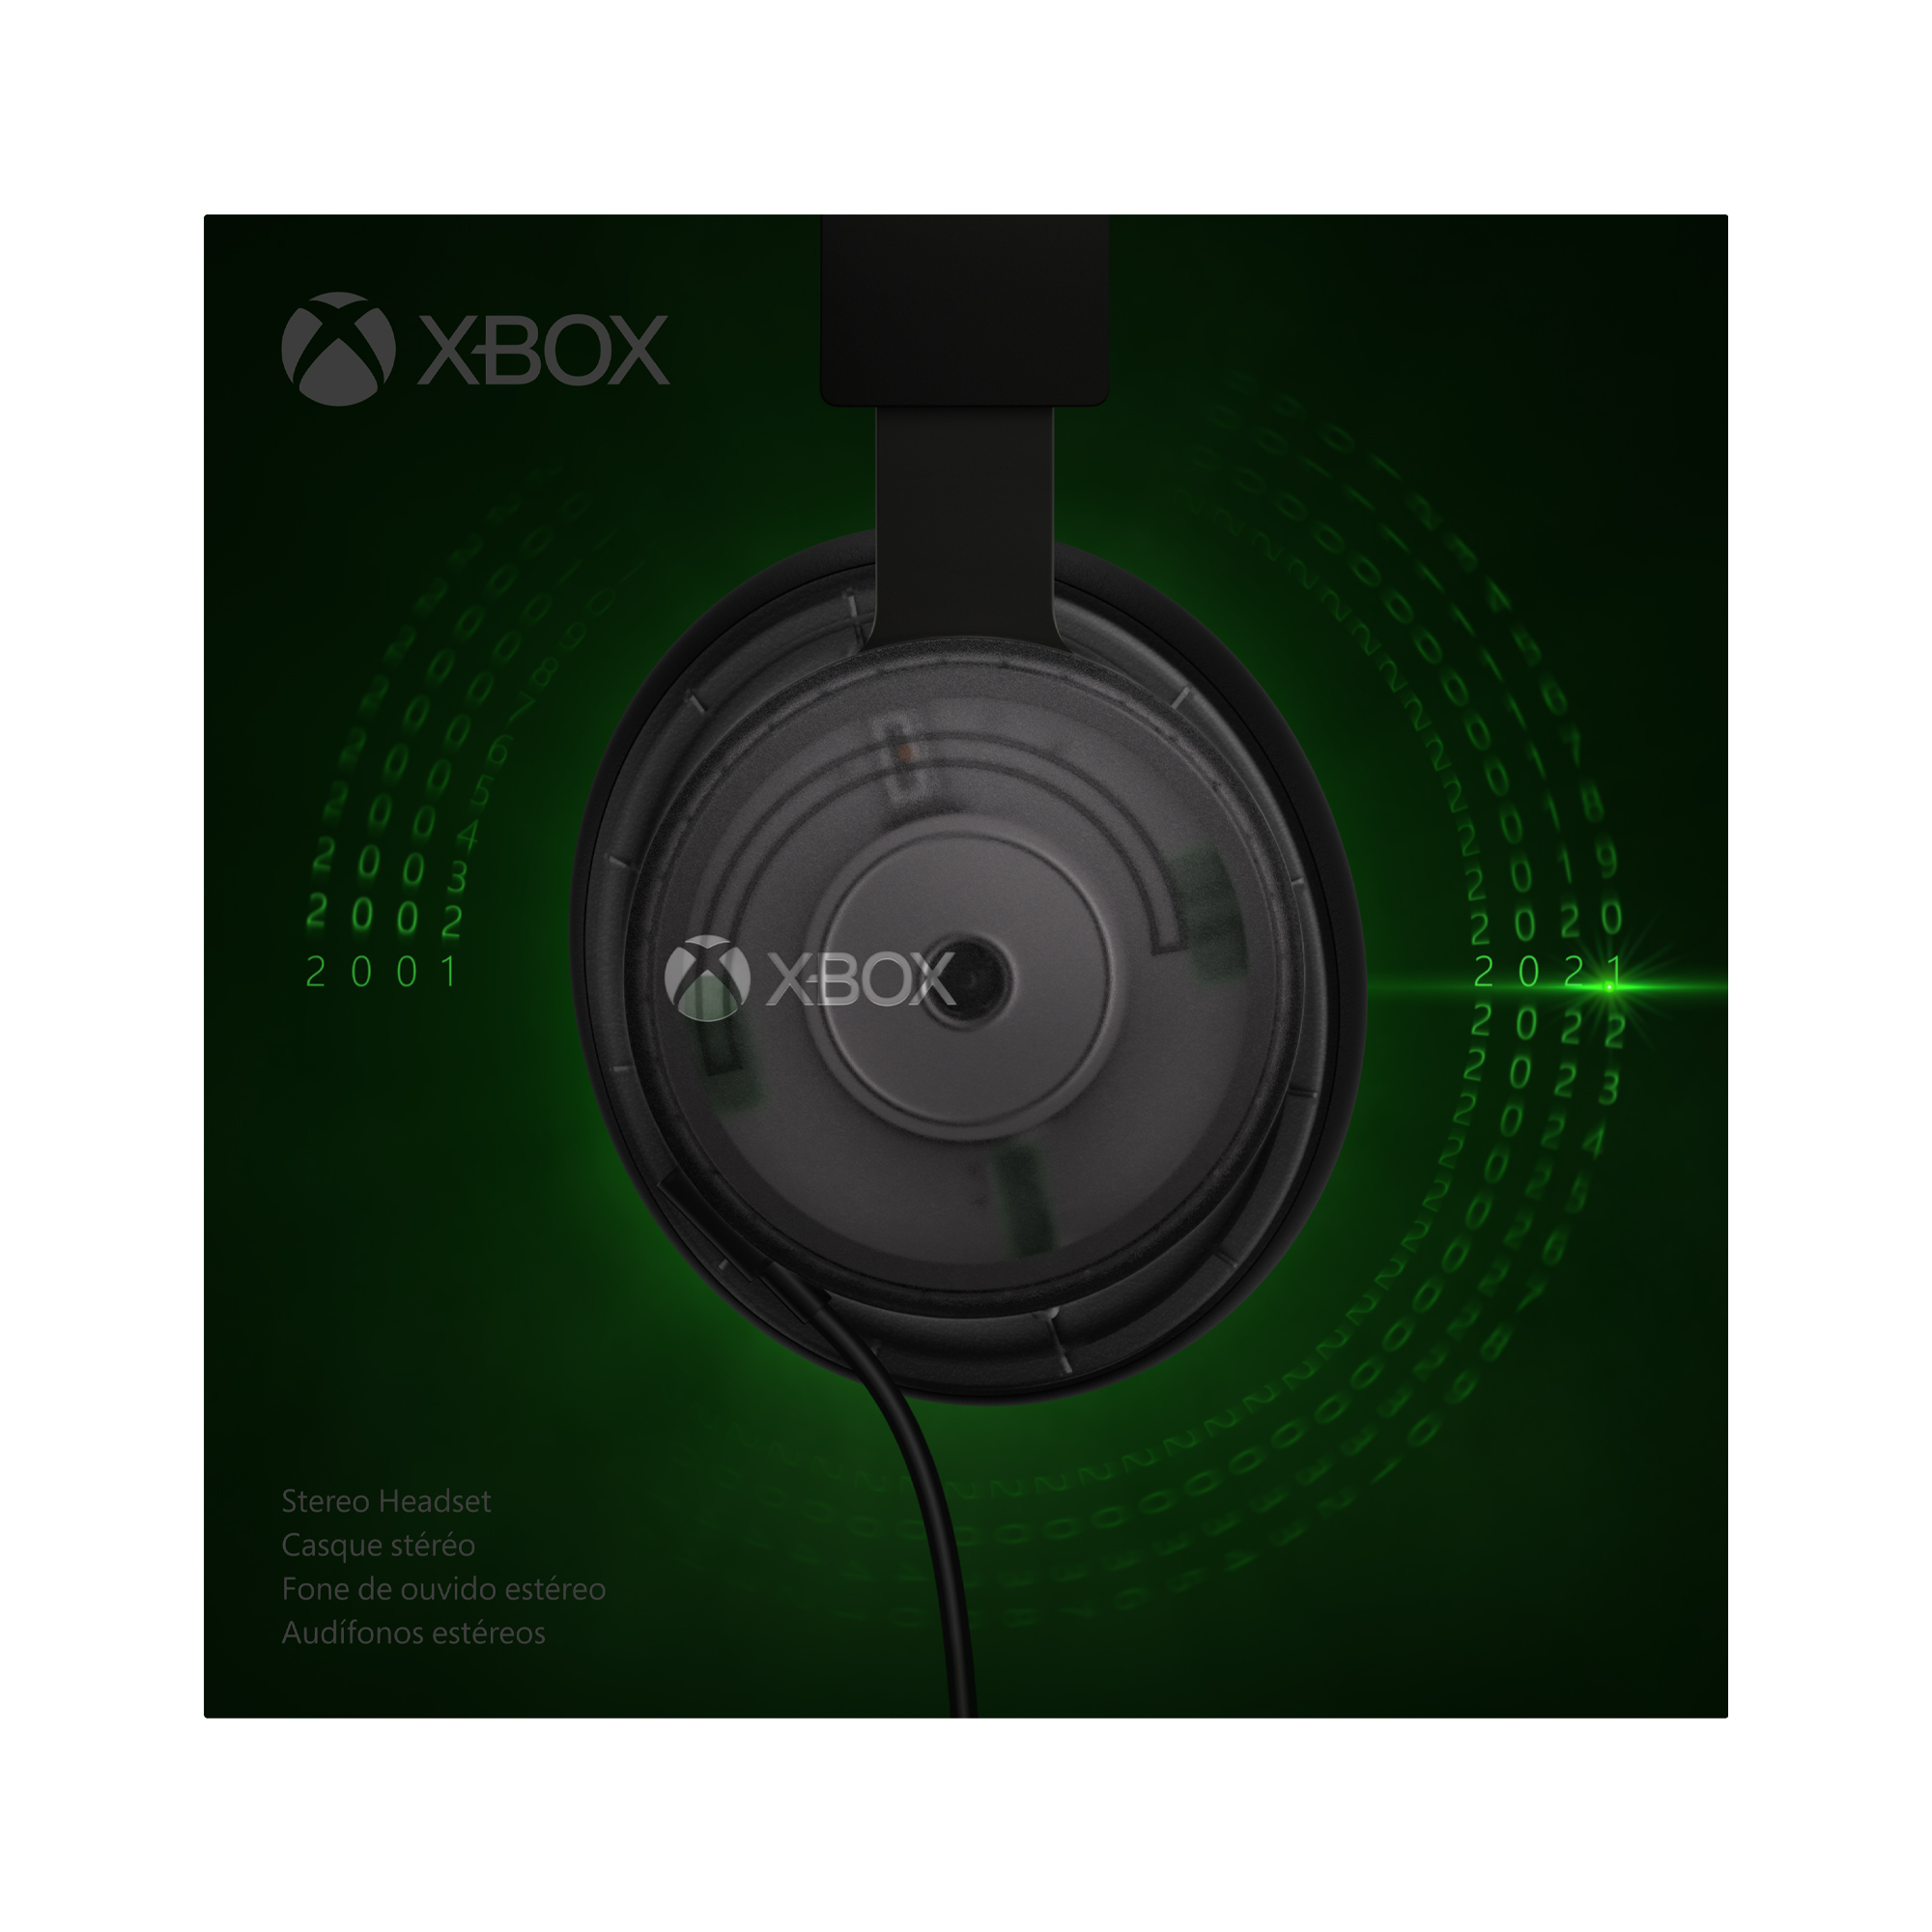 Xbox Stereo Headset - 20th Anniversary SE - image 2 of 10